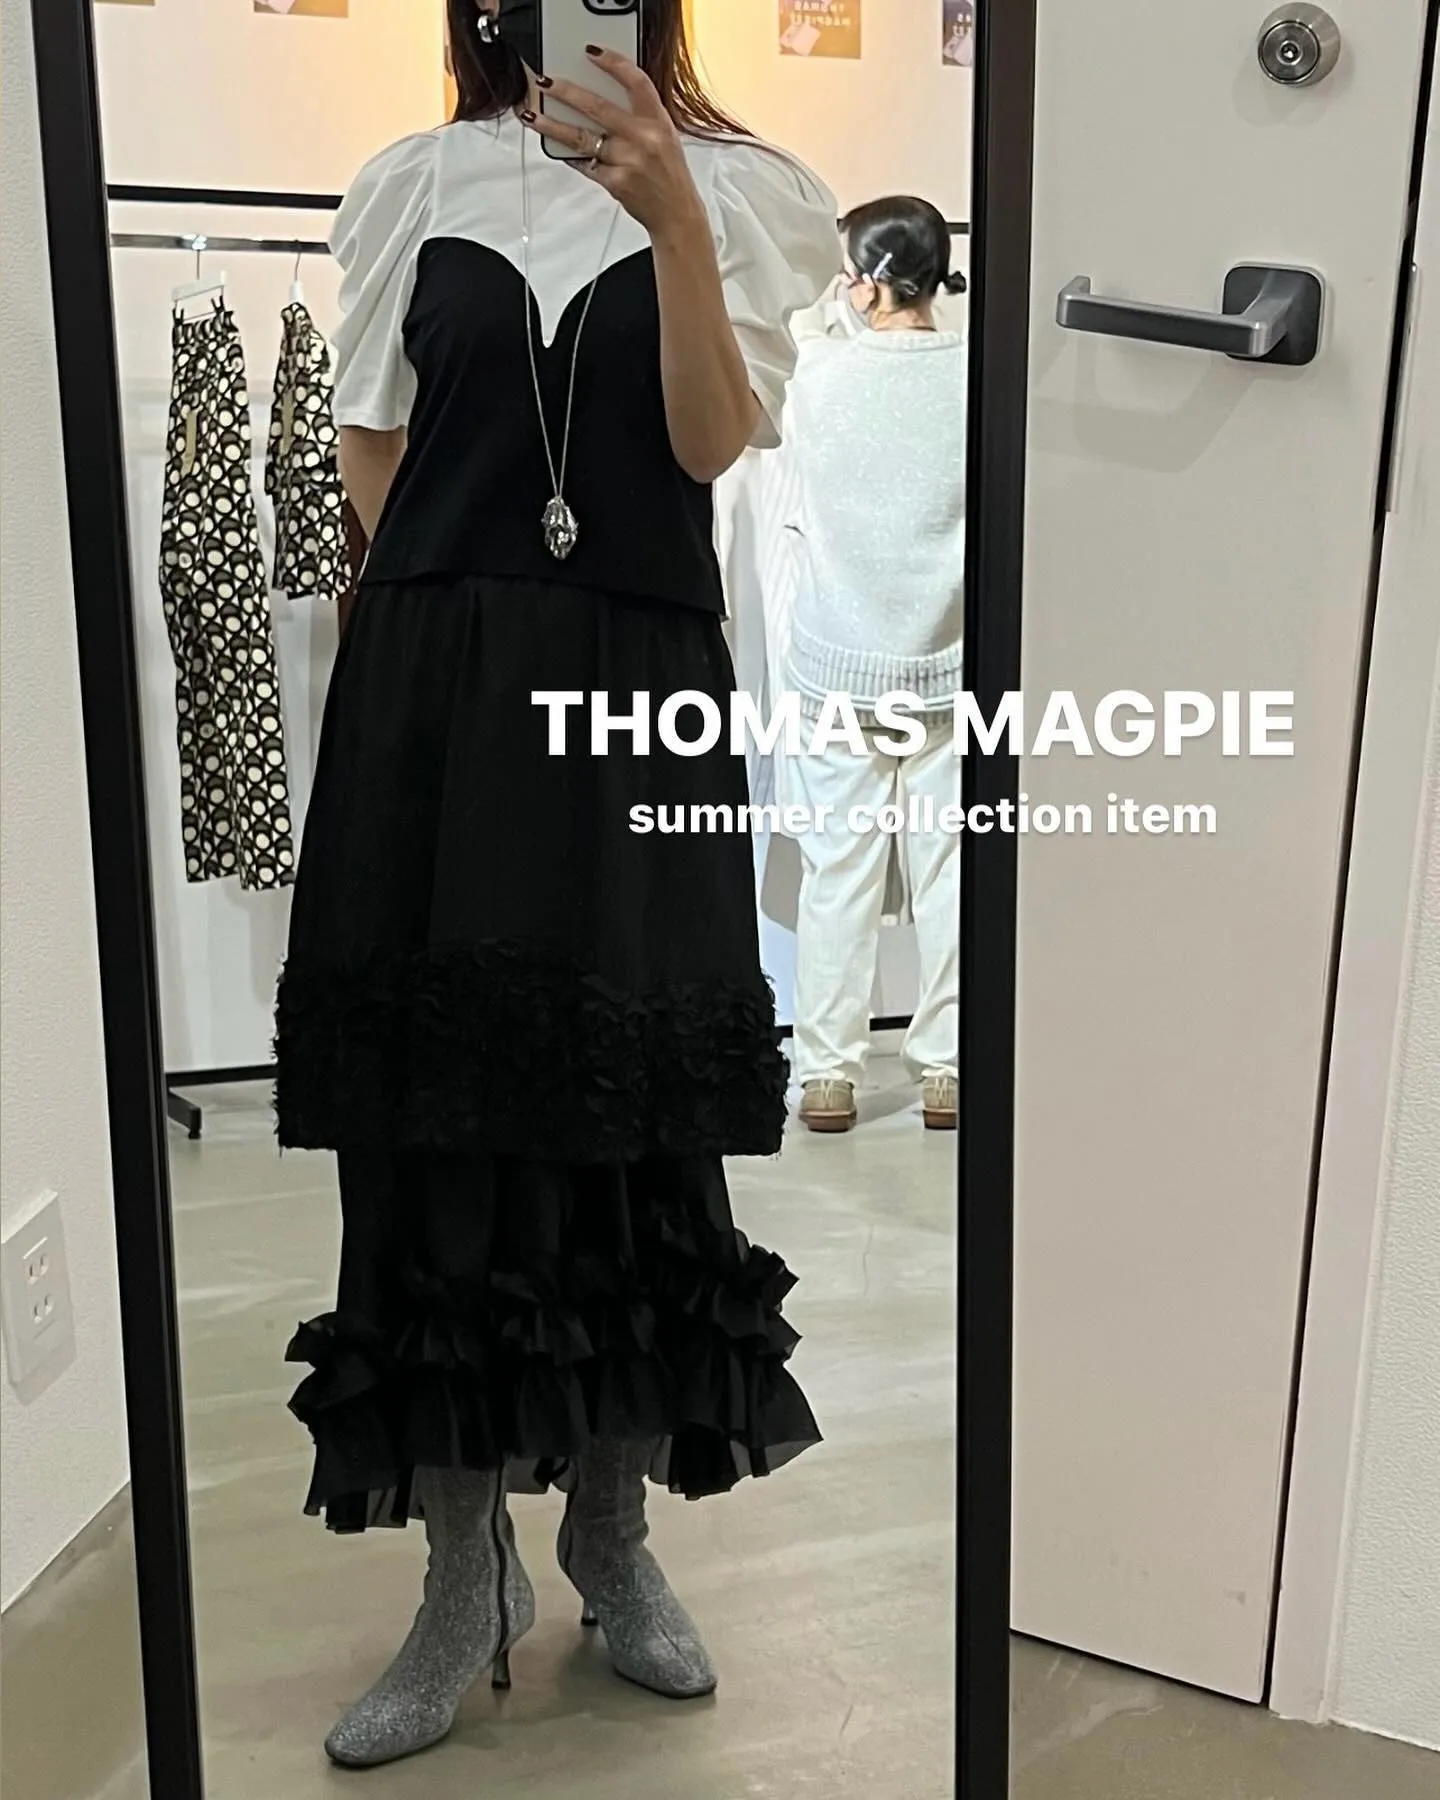 THOMASMAGPIE summer collection